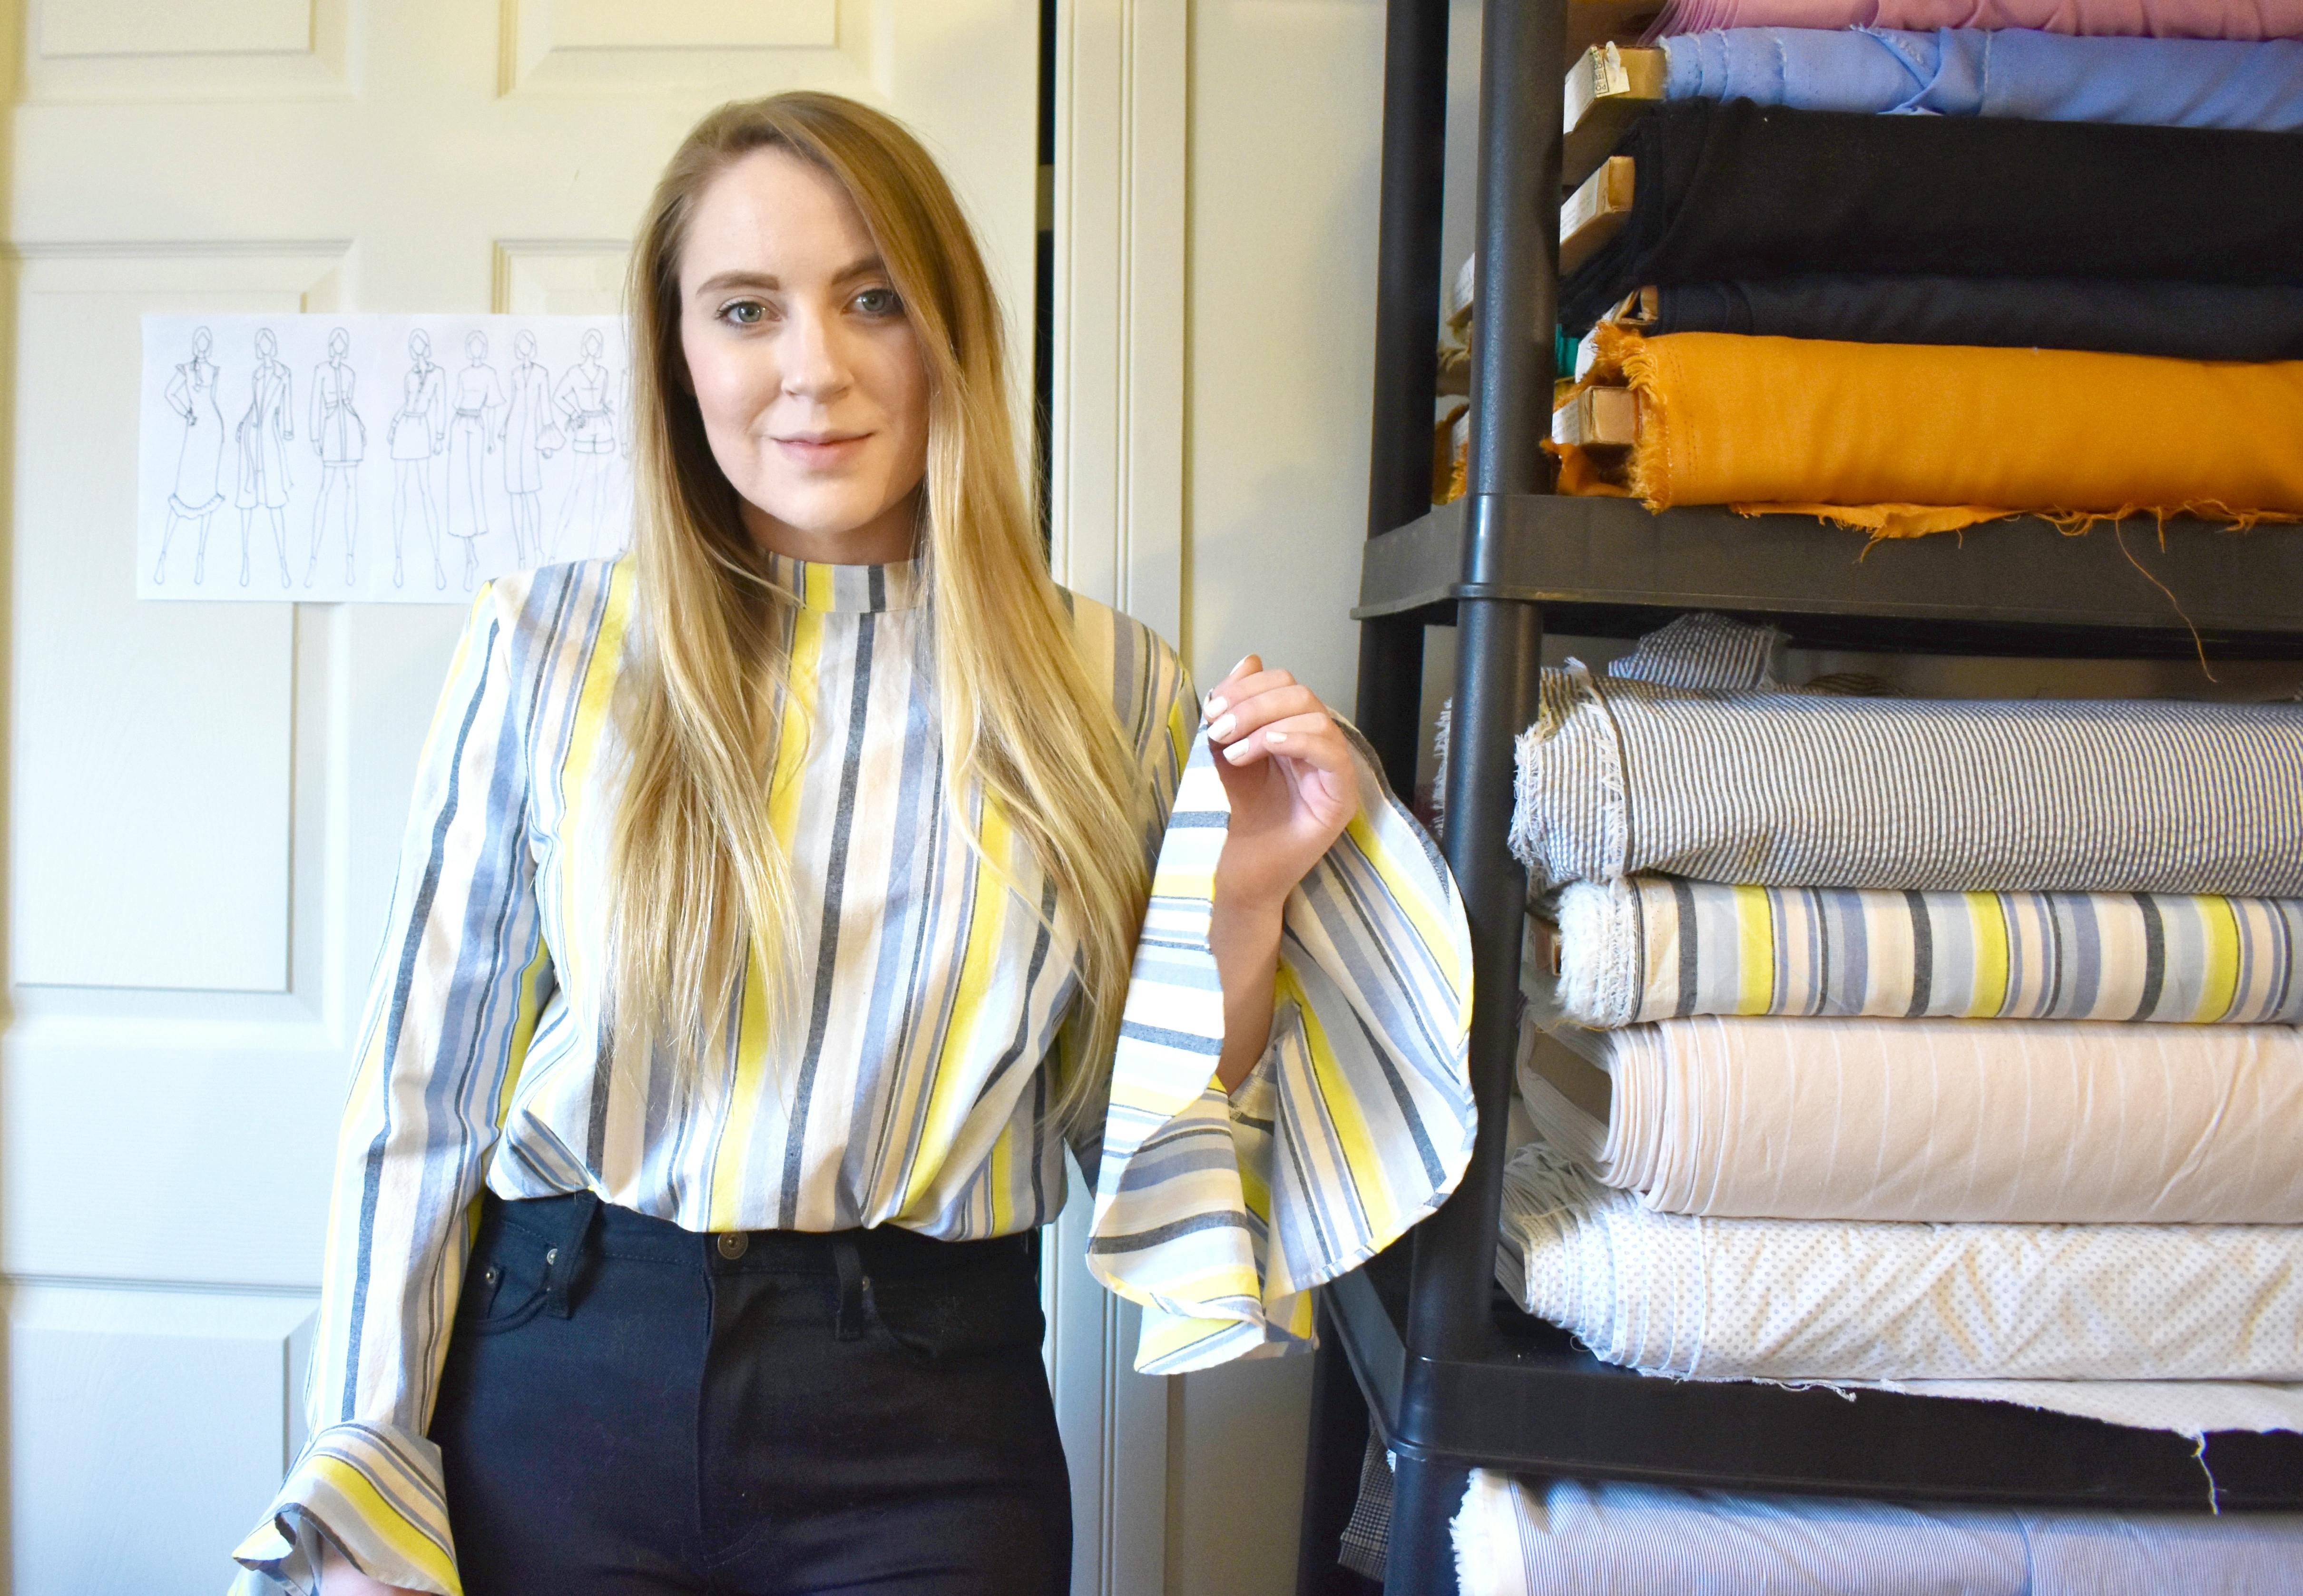 Kelsey MacDonald, a fashion designer based in Halifax, says COVID-19 helped her realize the importance of having an online store for her brand.